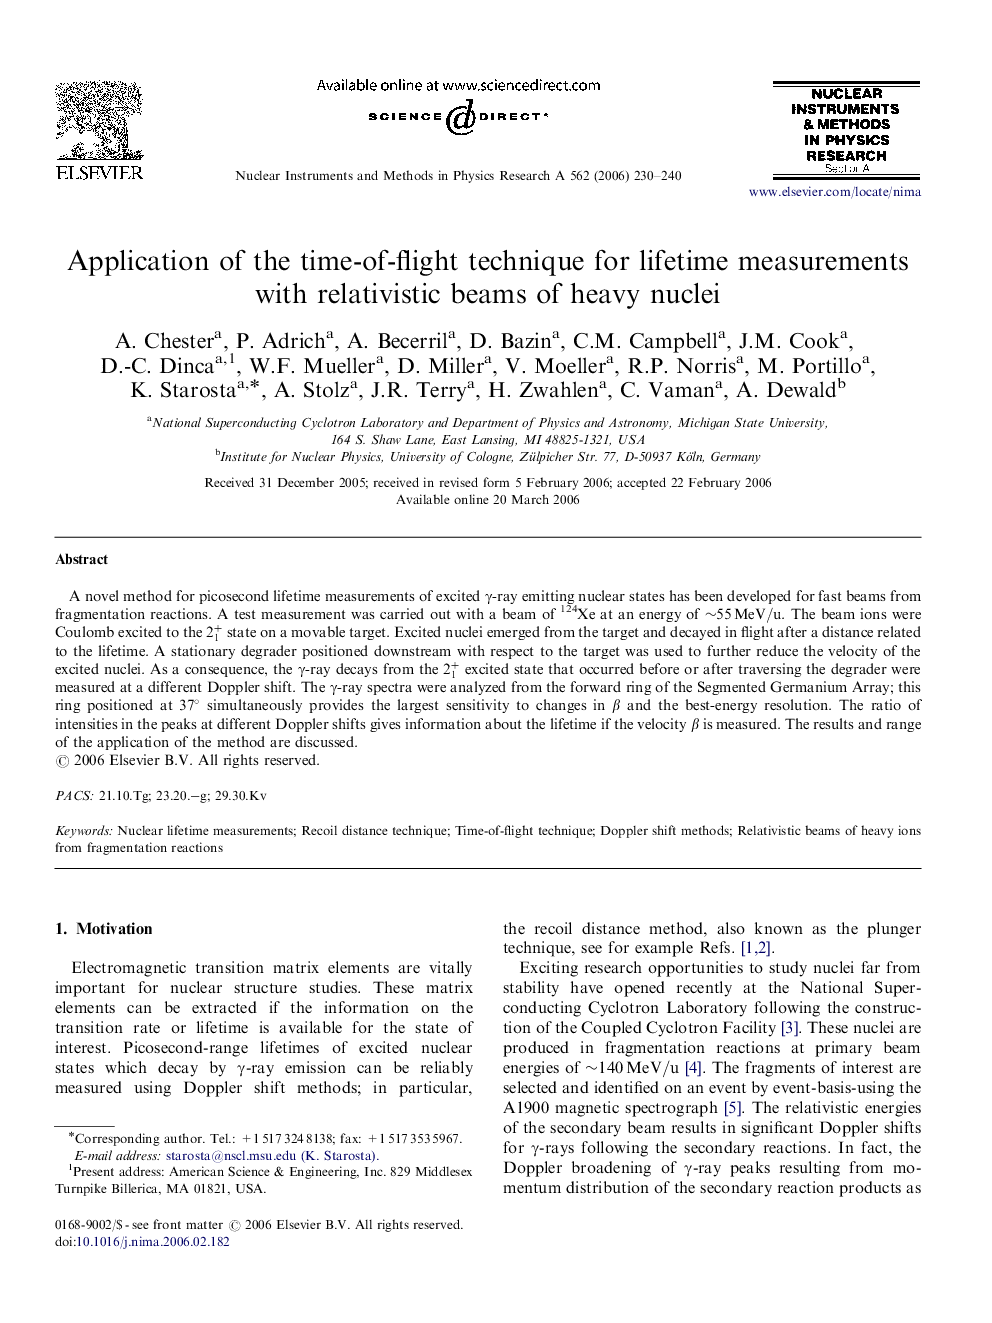 Application of the time-of-flight technique for lifetime measurements with relativistic beams of heavy nuclei